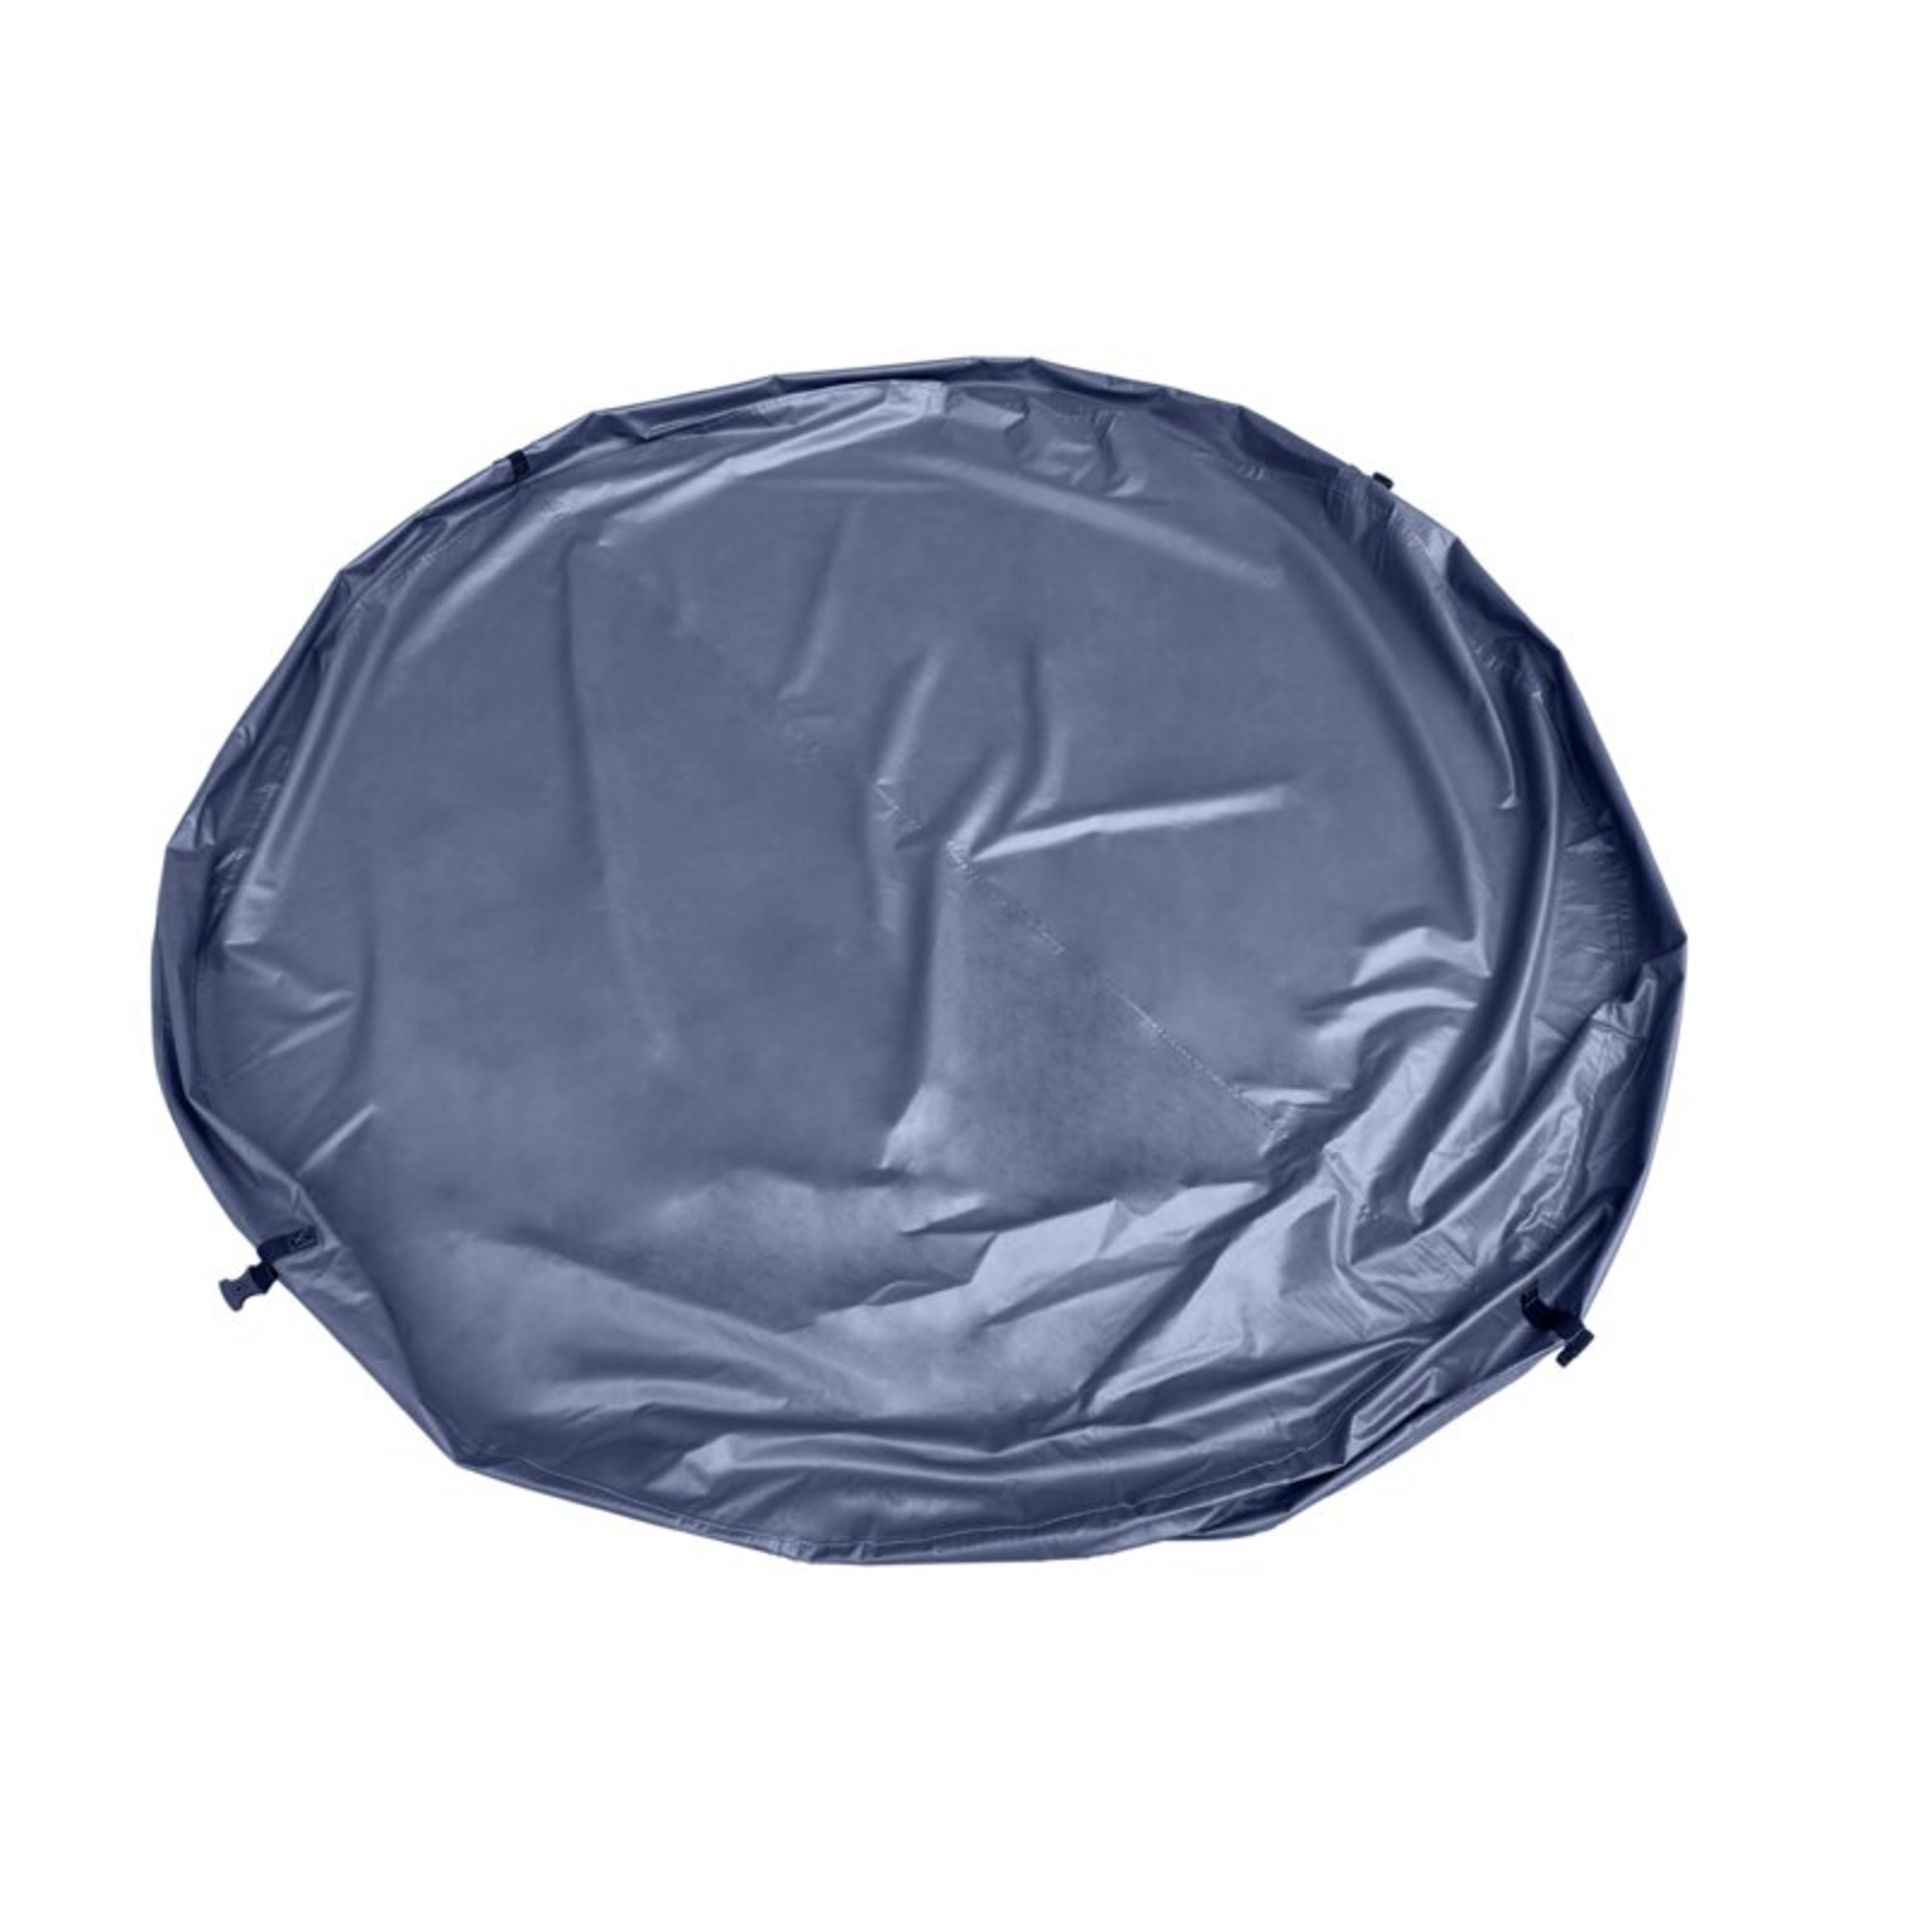 Eugroundlevel 4 - Person 108 - Jet Round Inflatable Hot Tub in Blue - RRP £569.99. - Image 3 of 7